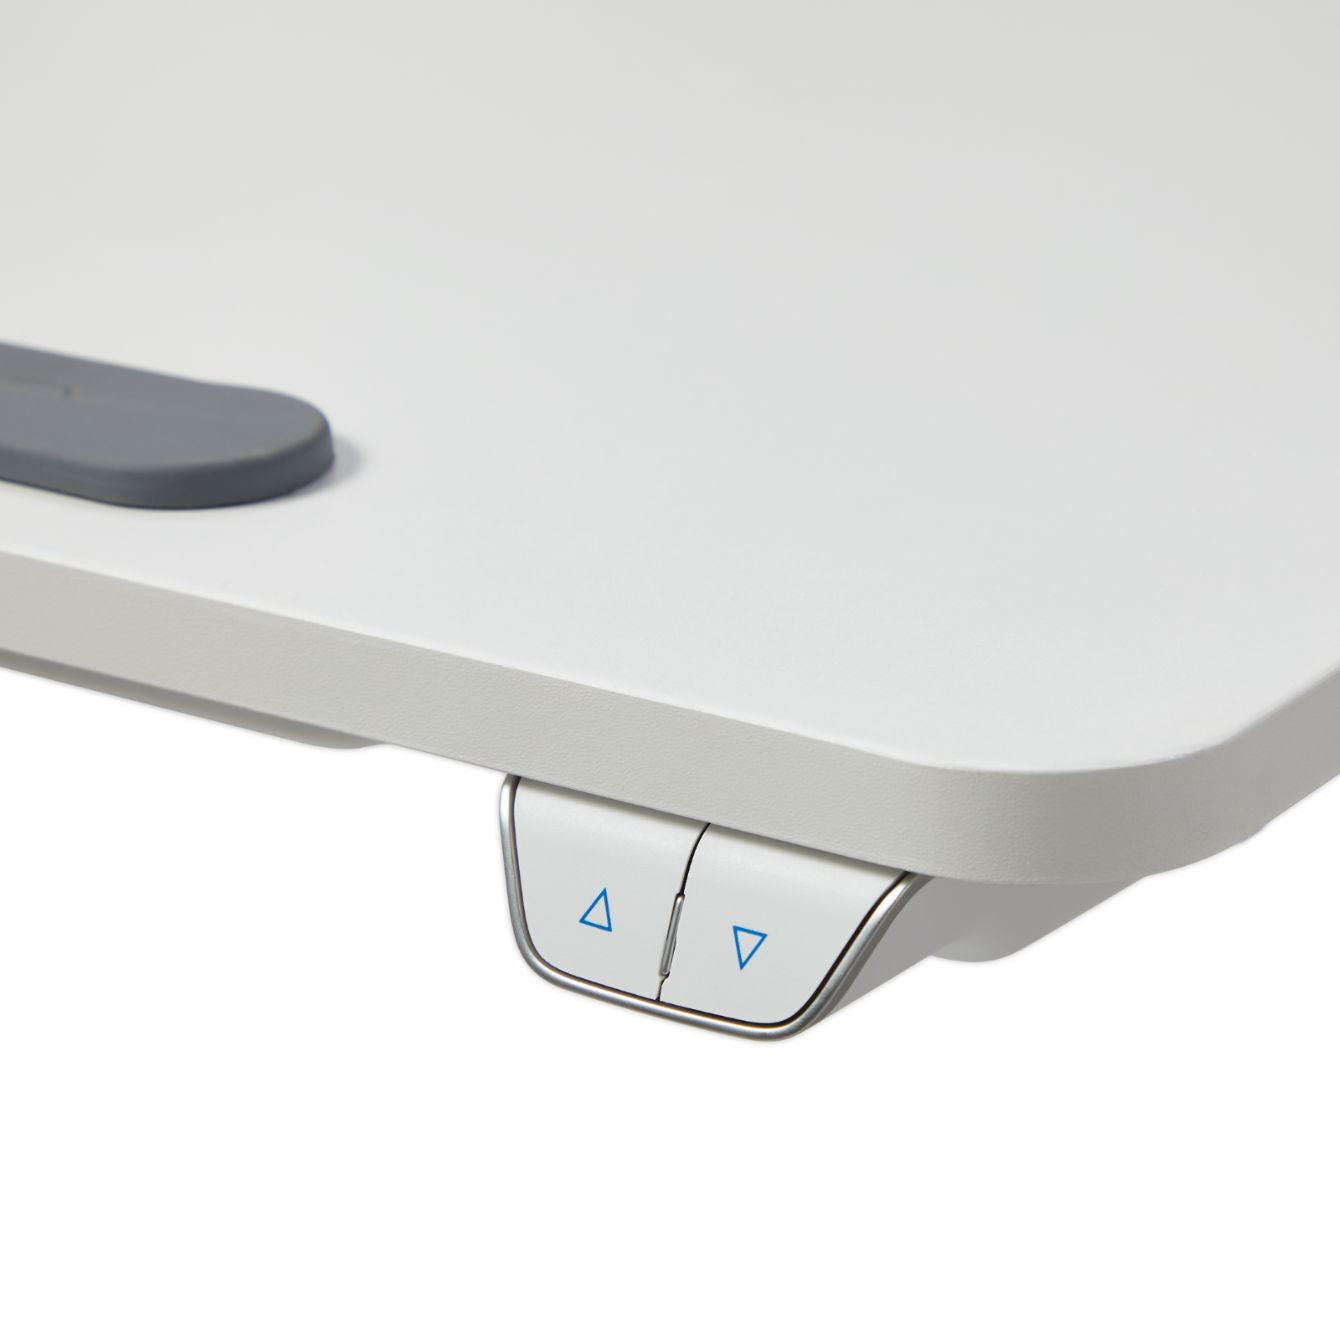 KOWO K30012 height adjustable desk has adjustable height button so can adjjust the height to our needs 